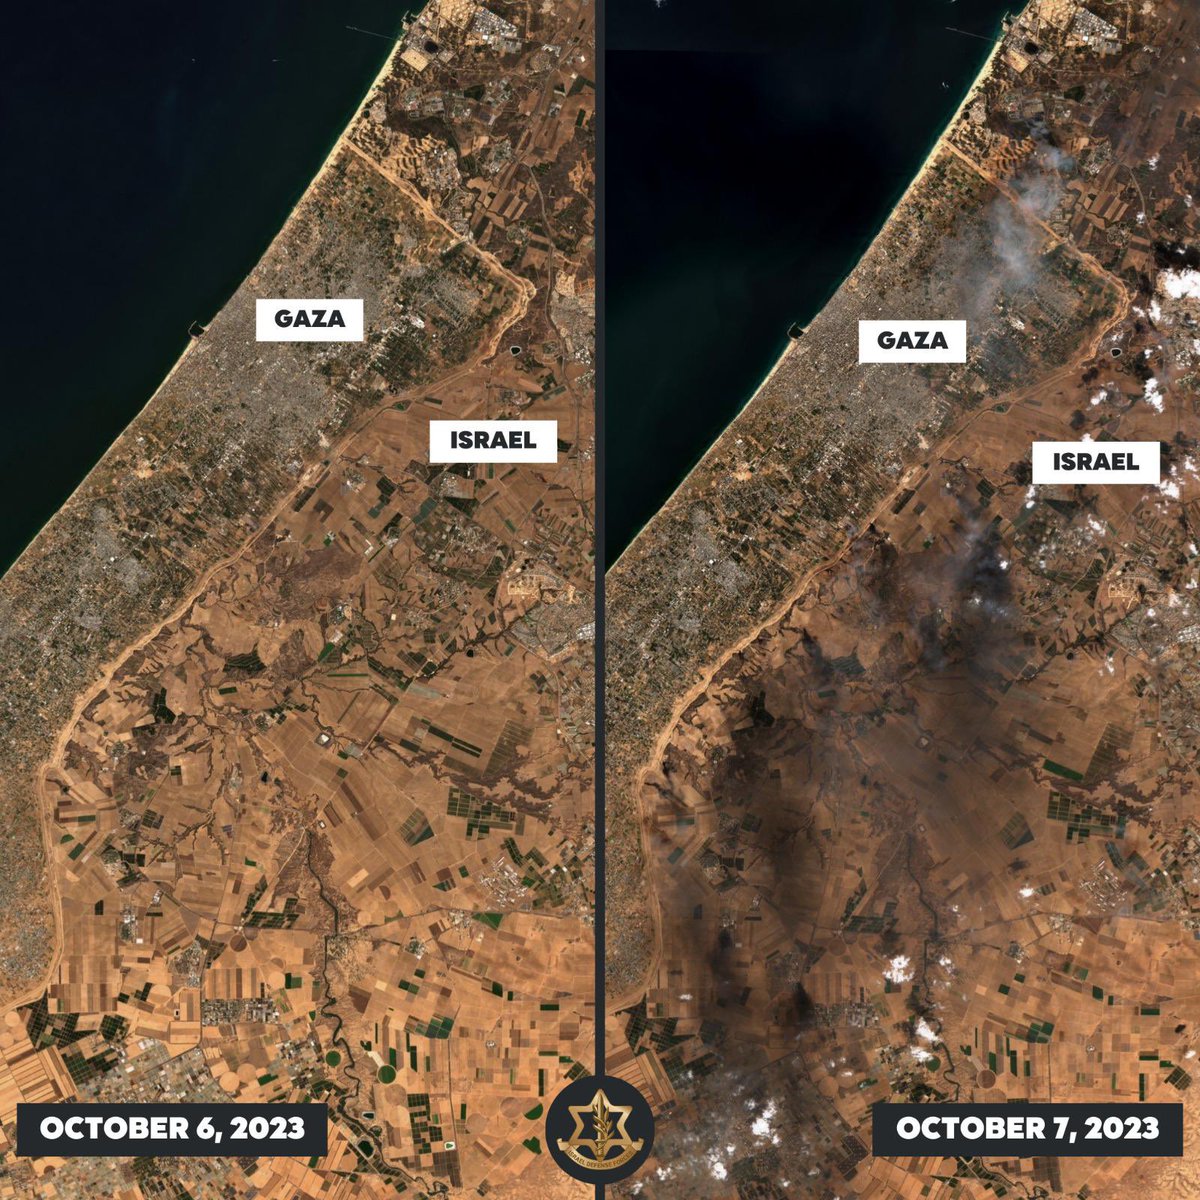 The lengths Hamas is willing to go in order to commit war crimes are visible even from outer space.